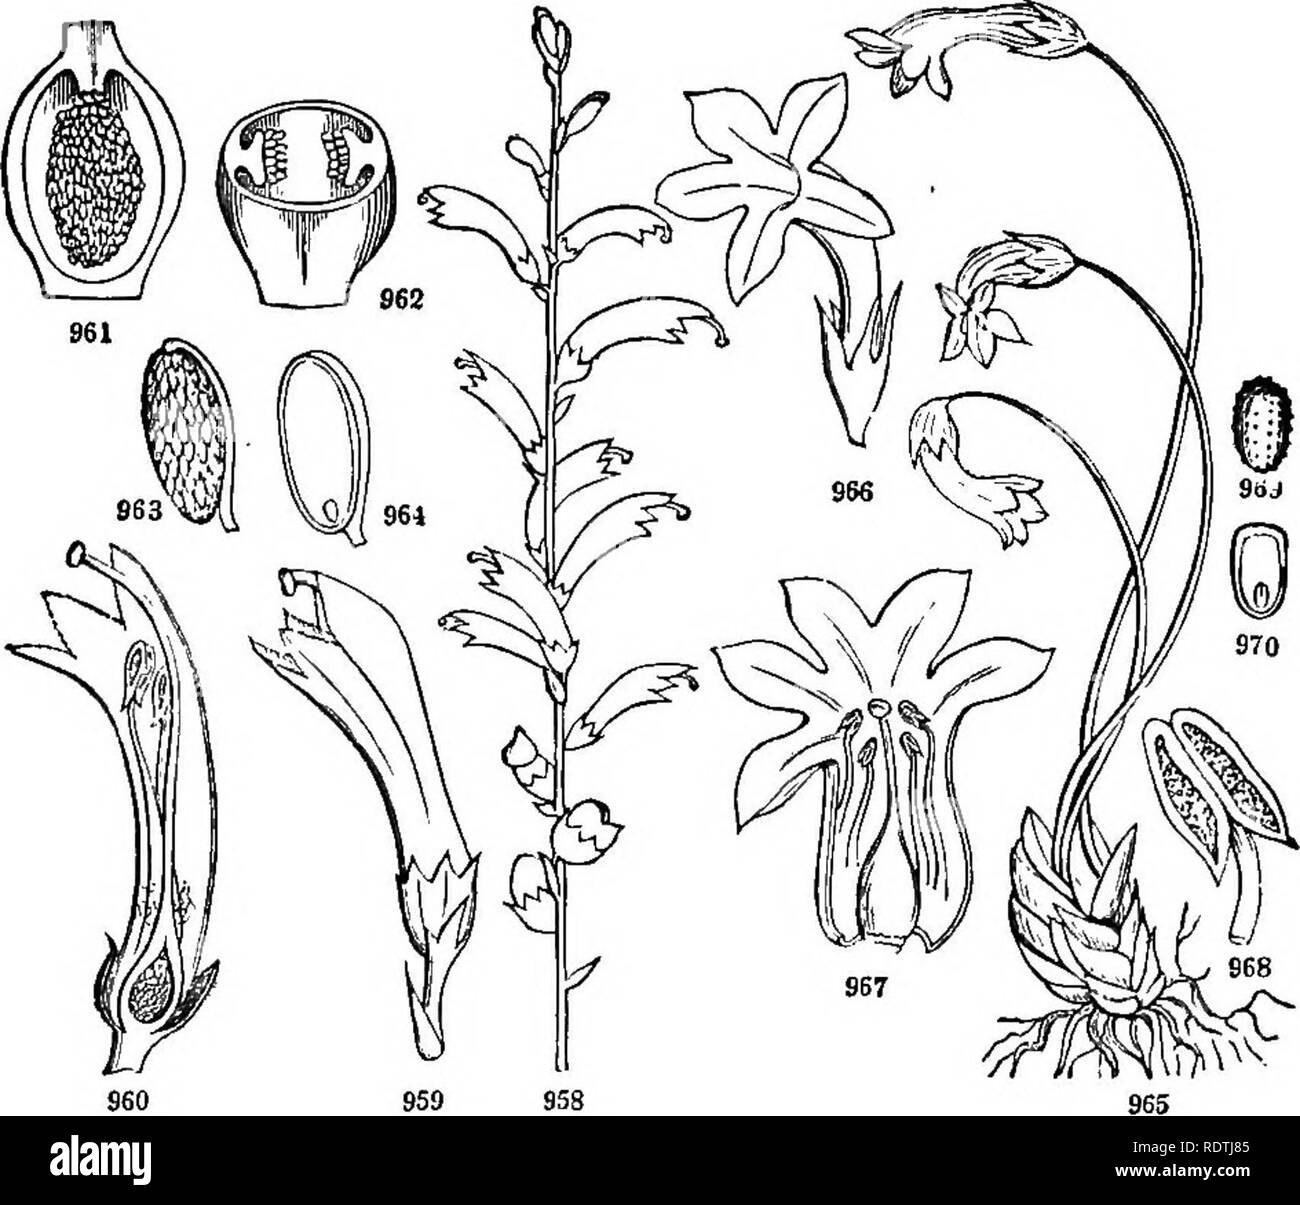 . Introduction to structural and systematic botany, and vegetable physiology. Botany. 446 ILLUSTRATIONS OP THE NATURAL ORDERS. buoyant, sometimes evanescent or wanting, or -when produced in the air entire and somewhat fleshy, clustered at the base of the scape. Flowers showy, very irregular. Calyx of two sepals, or unequally five-parted. Corolla bilabiate, personate ; the very short tube spurred. Stamens two, inserted on the upper hp of the co- rolla: anthers confluently one-celled. Ovary free, one-celled with a free central placenta ! bearing numerous ovules. Seeds destitute of albumen. Embry Stock Photo